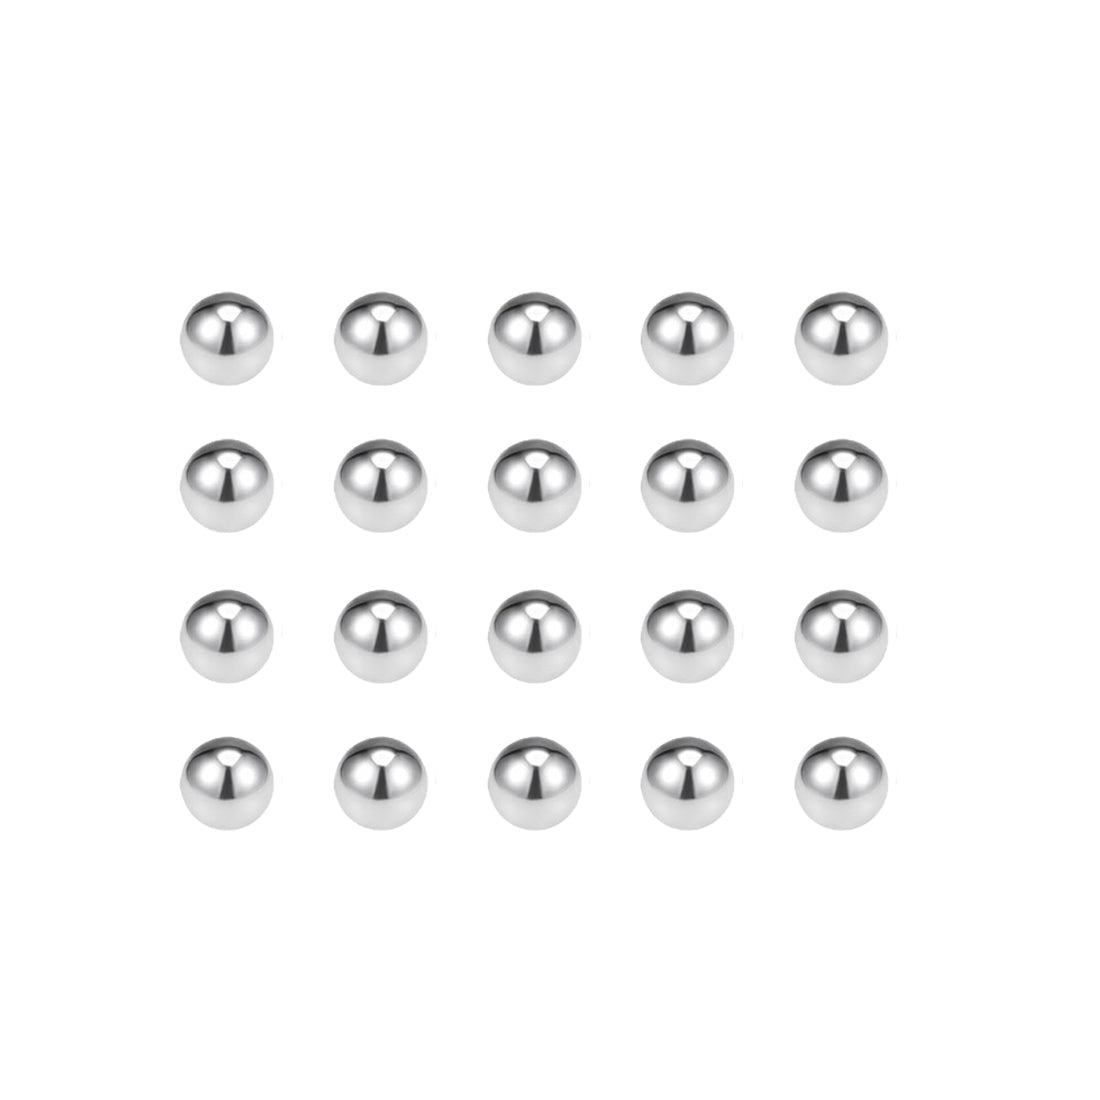 Uxcell Uxcell 4mm Bearing Balls 316L Stainless Steel G100 Precision Balls 100pcs